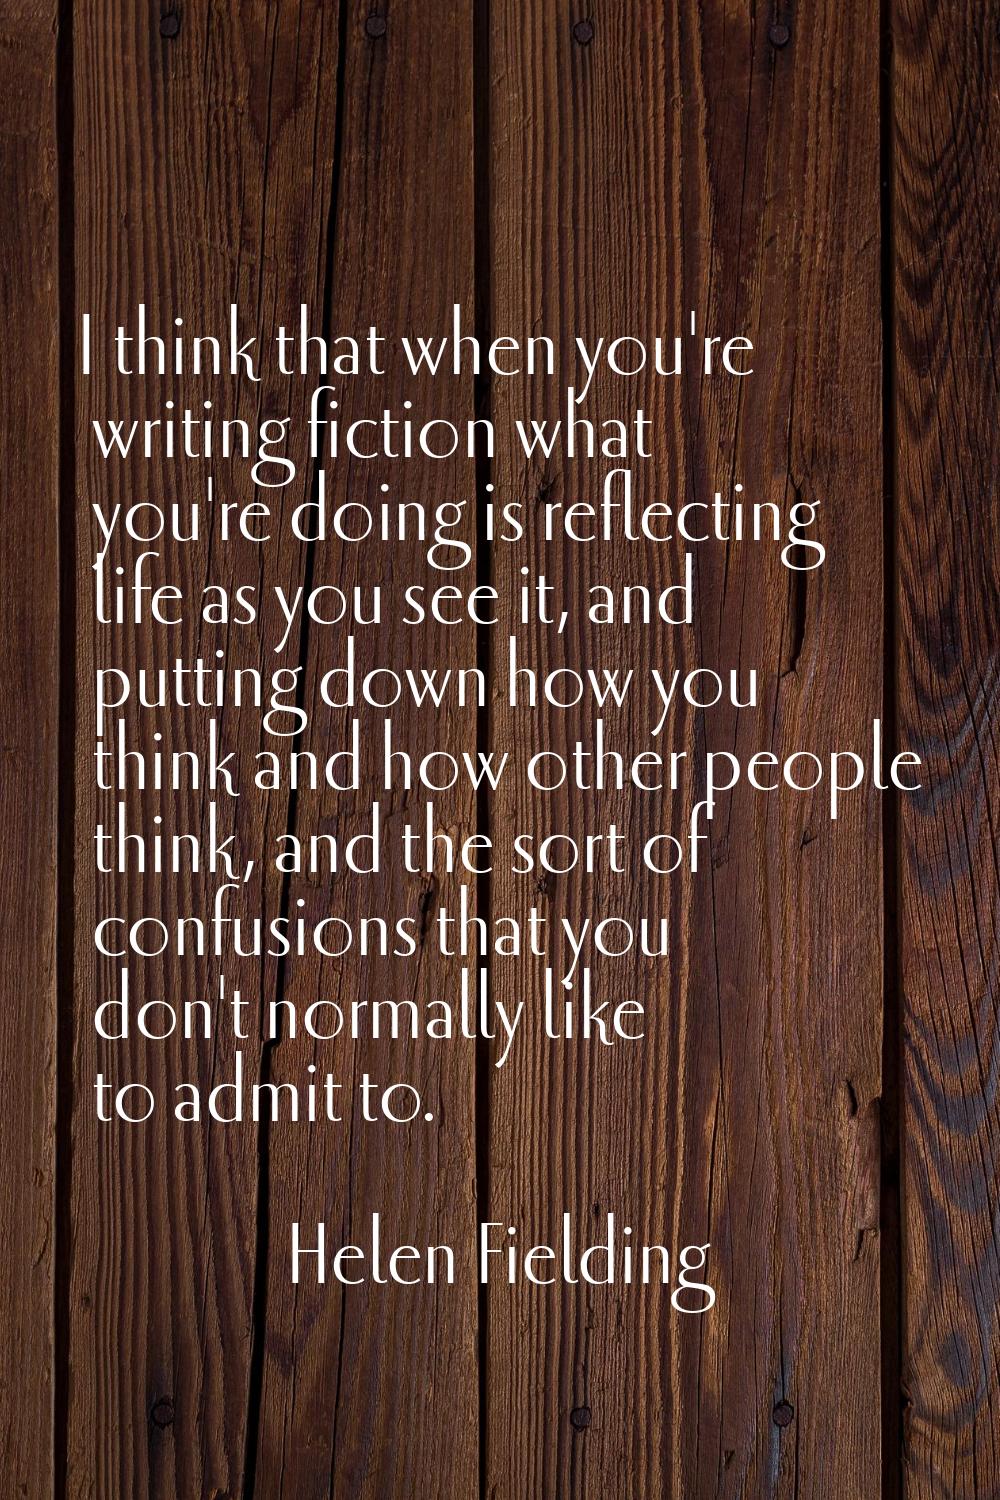 I think that when you're writing fiction what you're doing is reflecting life as you see it, and pu